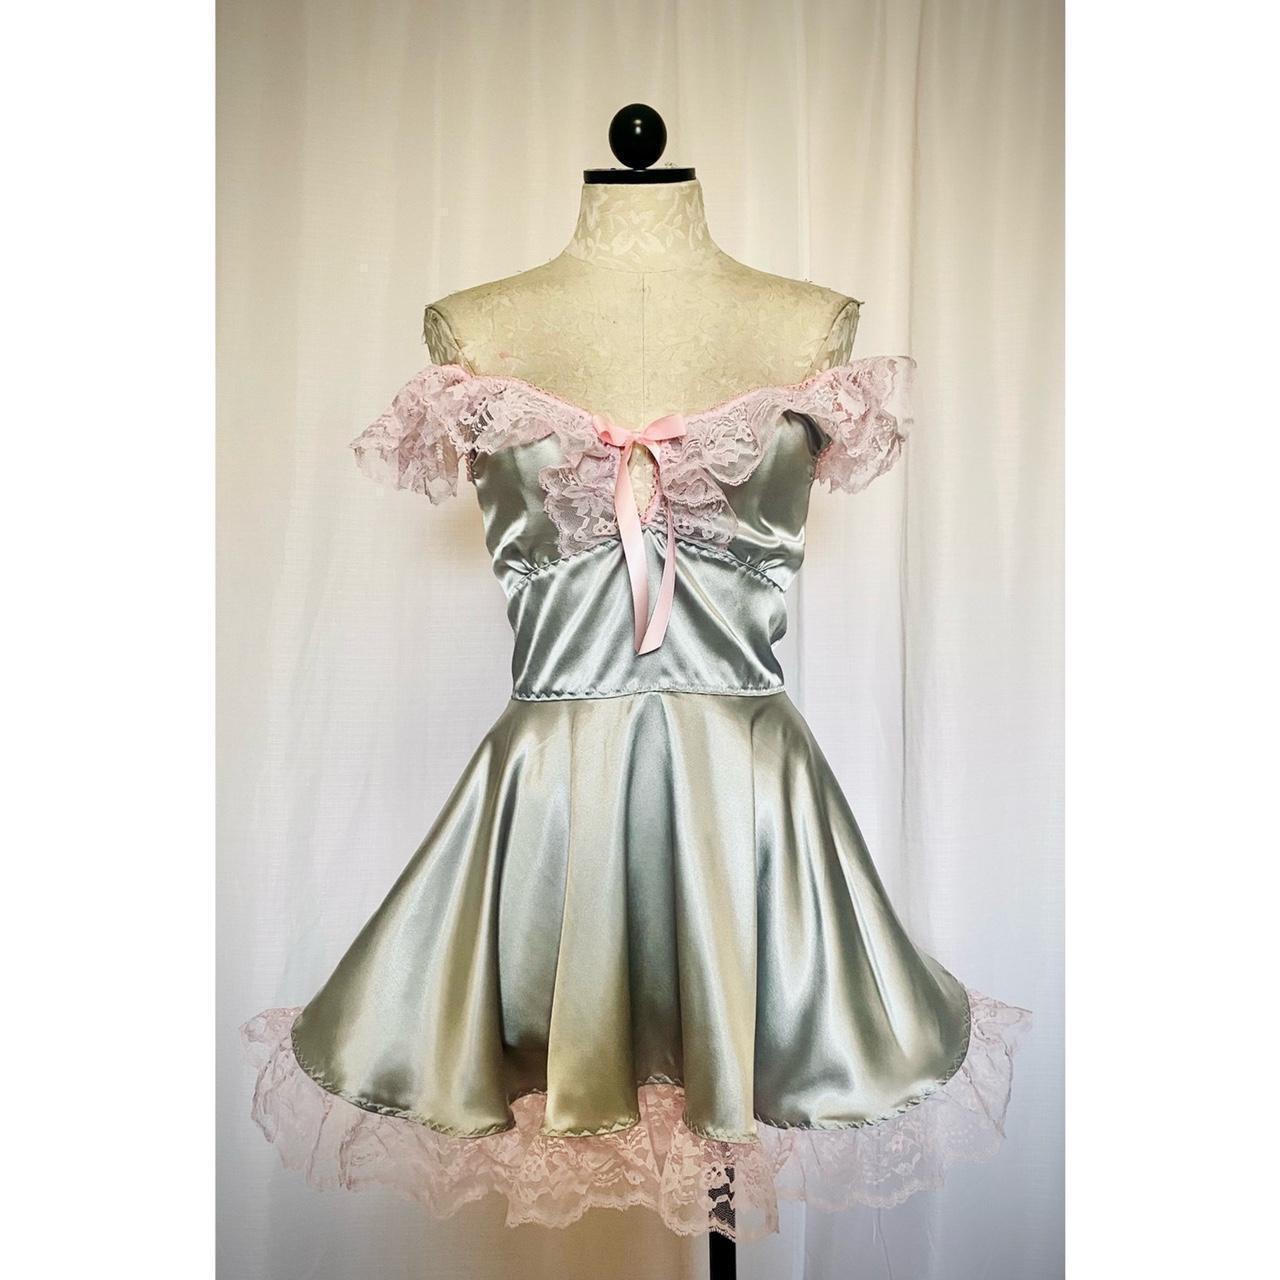 The Kathryn Dress in Silver with Pink Lace